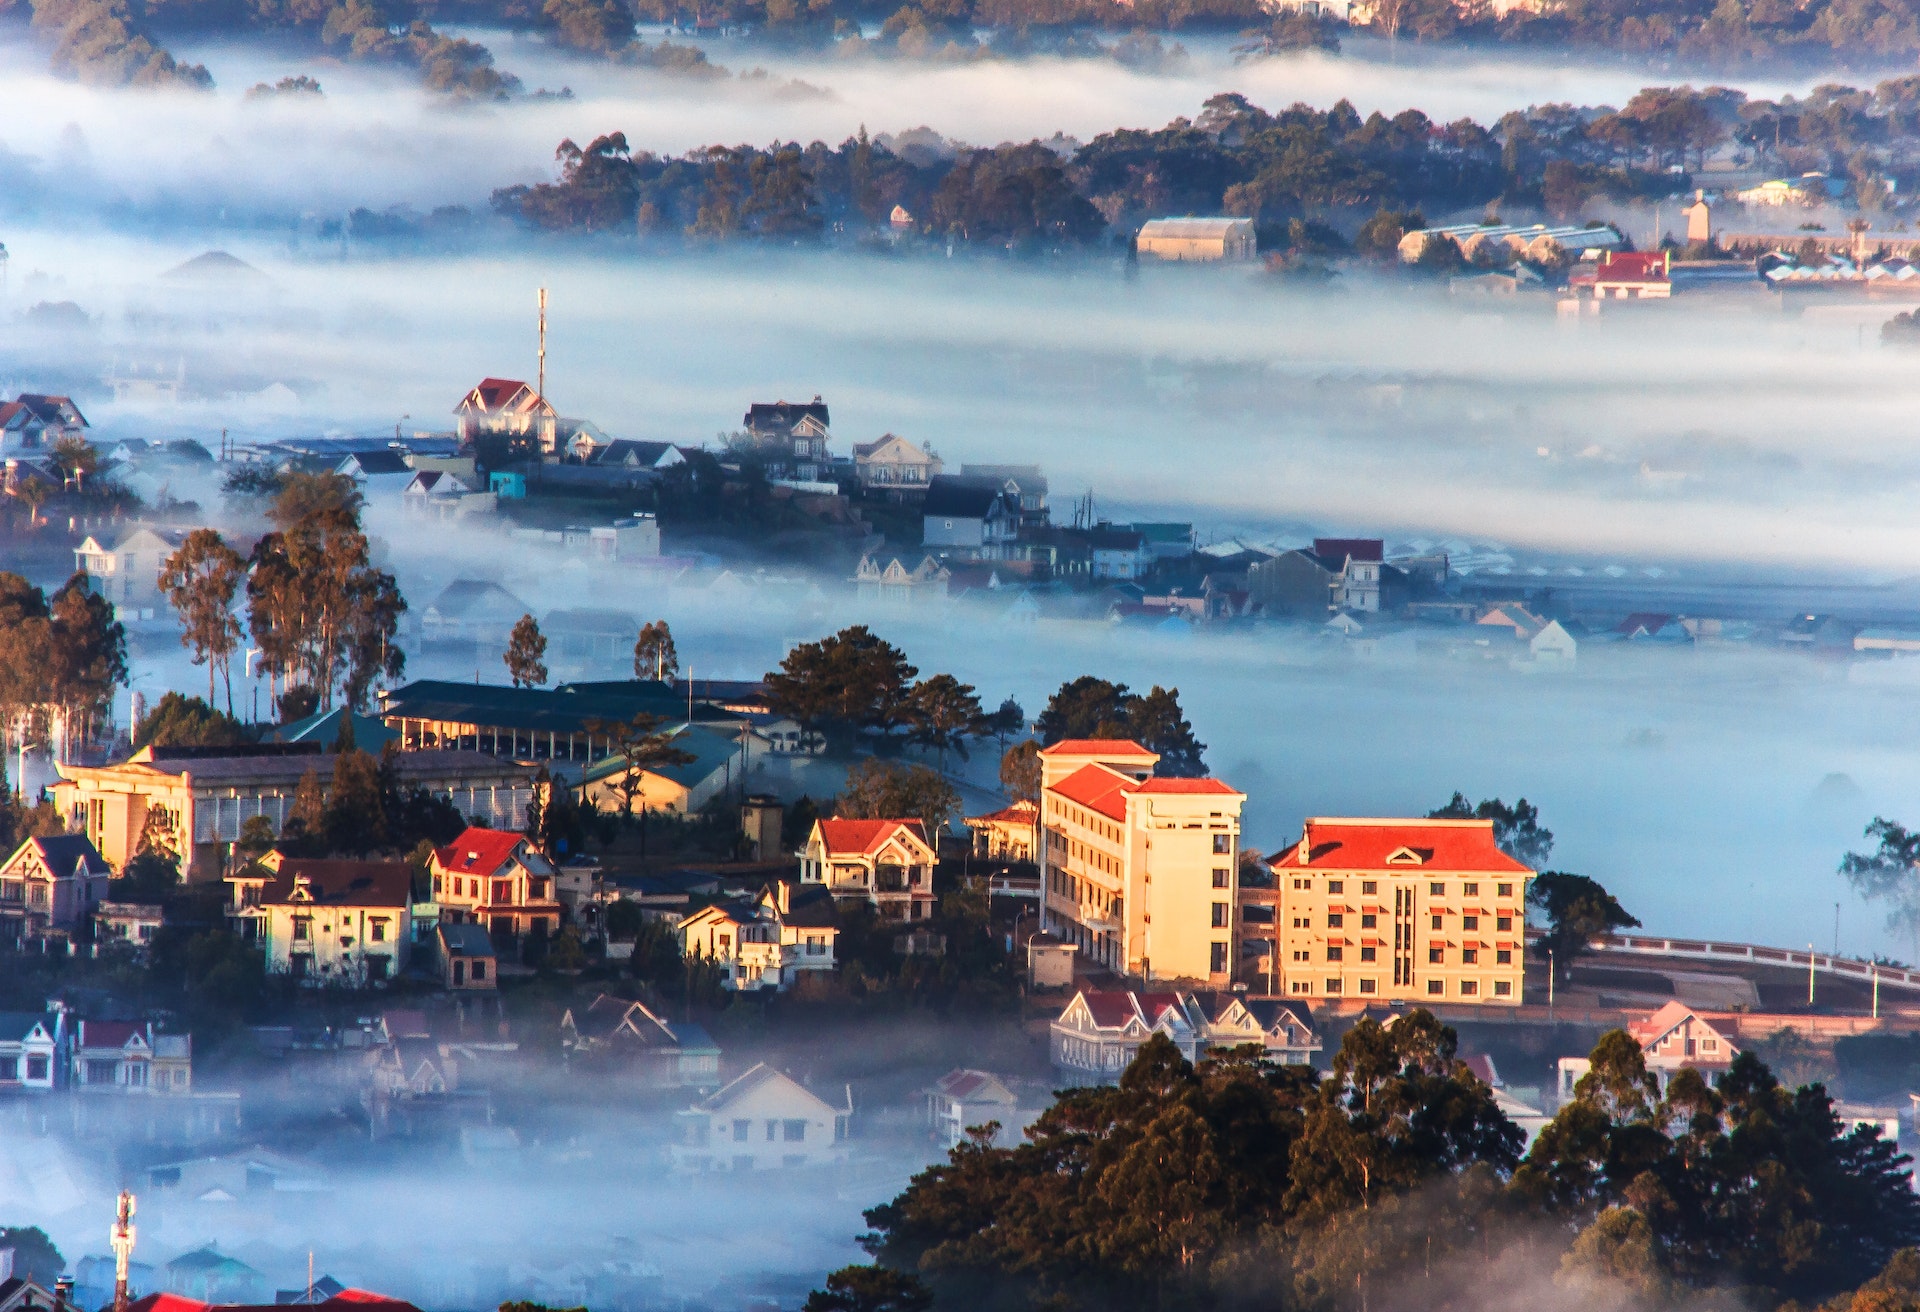 An aerial view overlooking the hill station of Dalat in Vietnam. The town is shroud in mist due to its high altitude, meaning only a few buildings are visible.